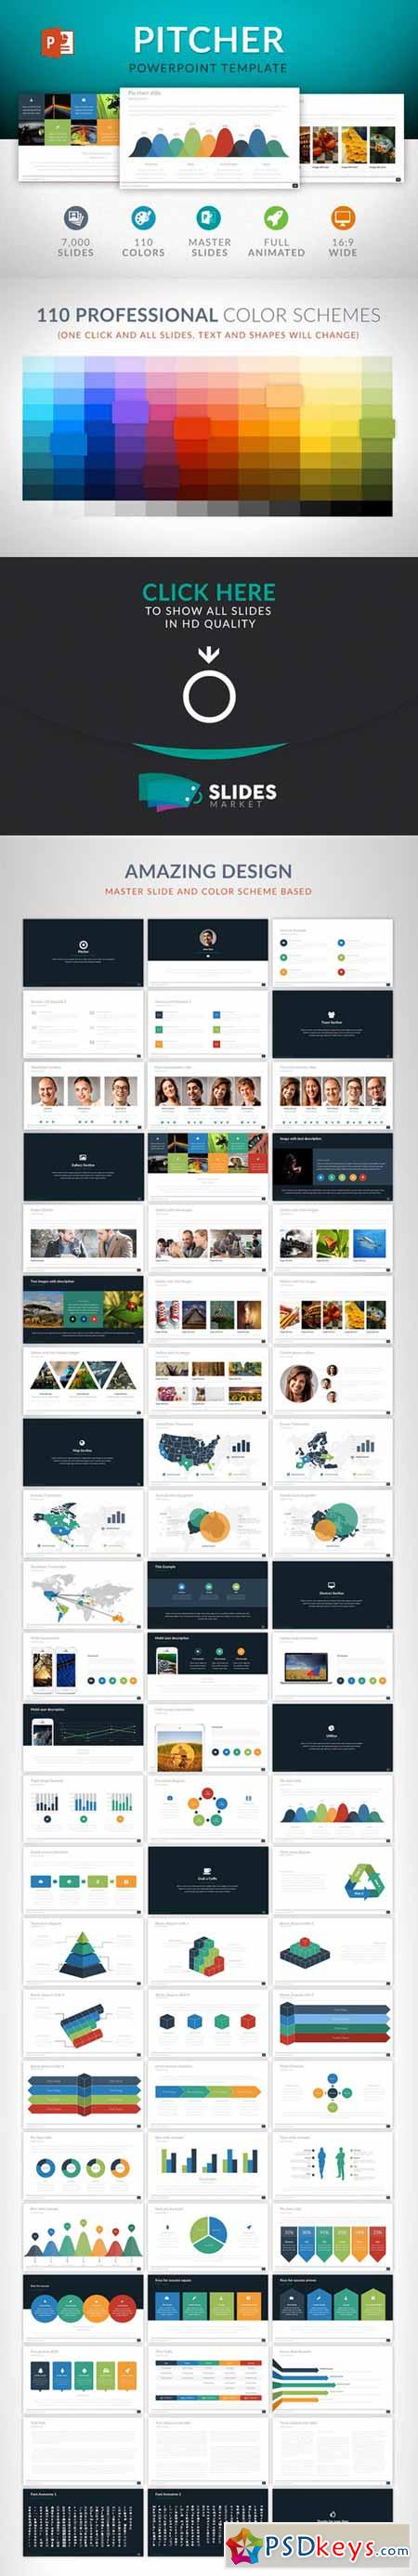 Pitcher Powerpoint Template 412804